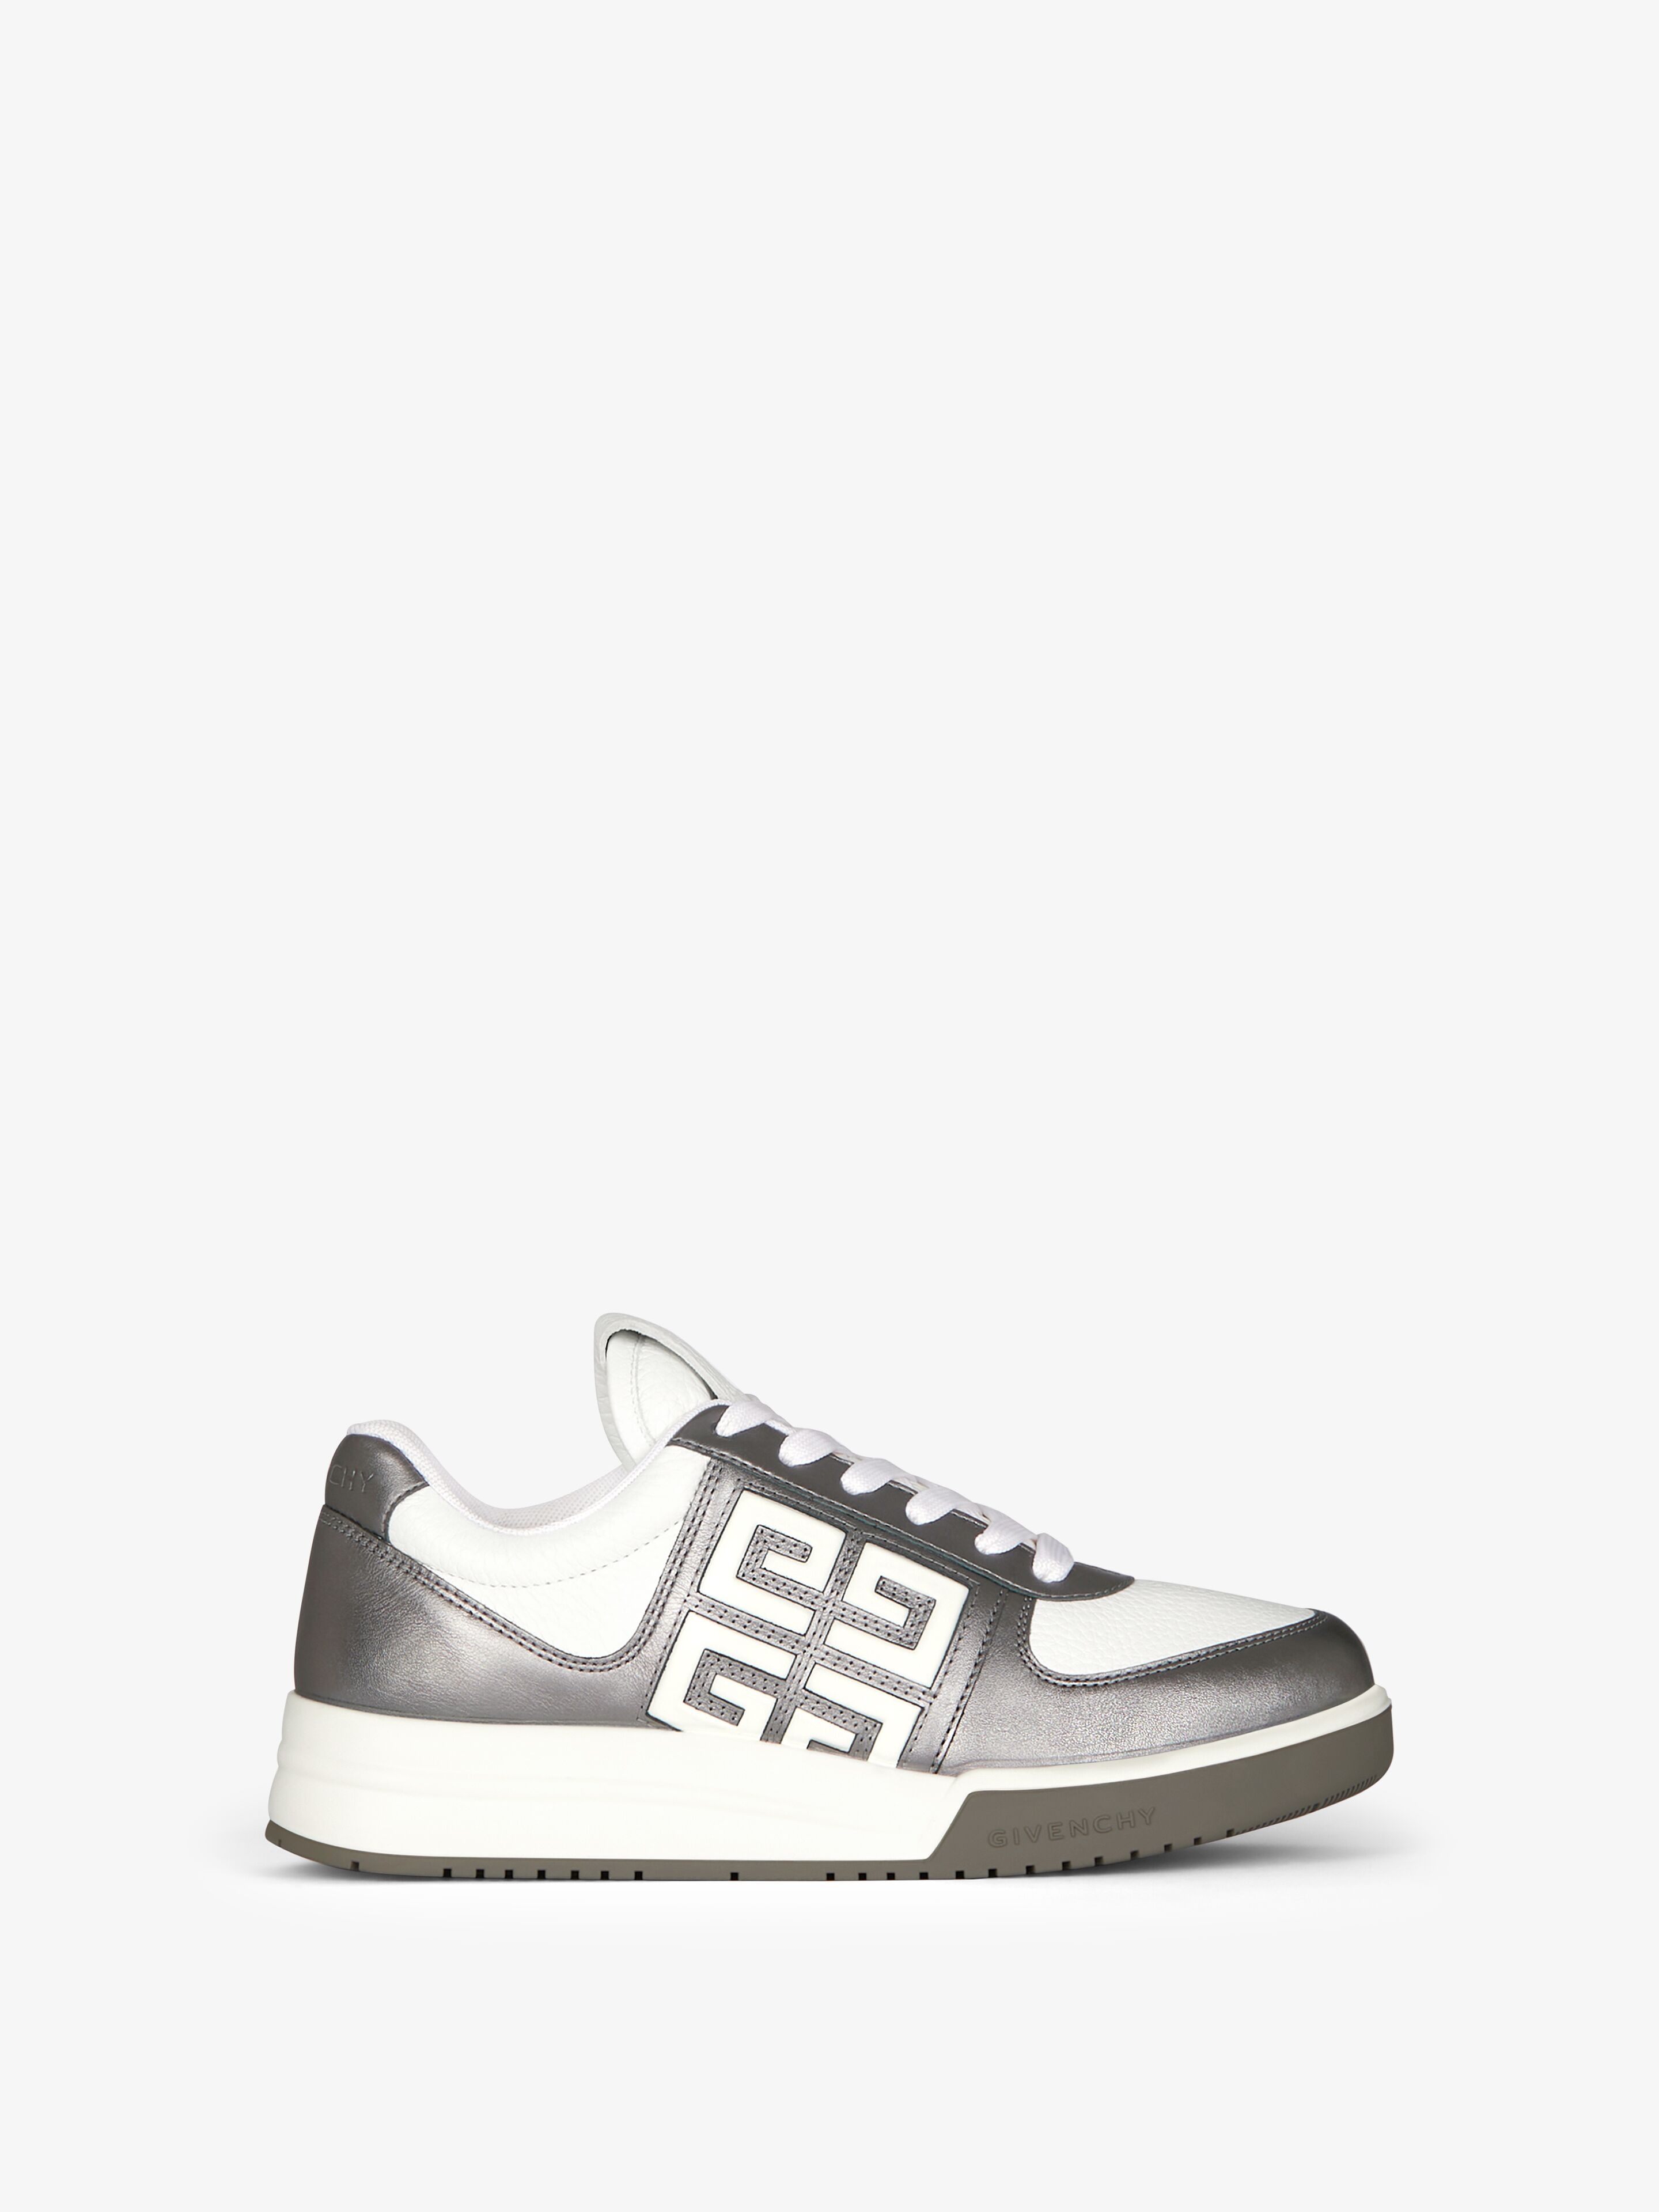 Givenchy Women's G4 Sneakers In Laminated Leather In White/silvery